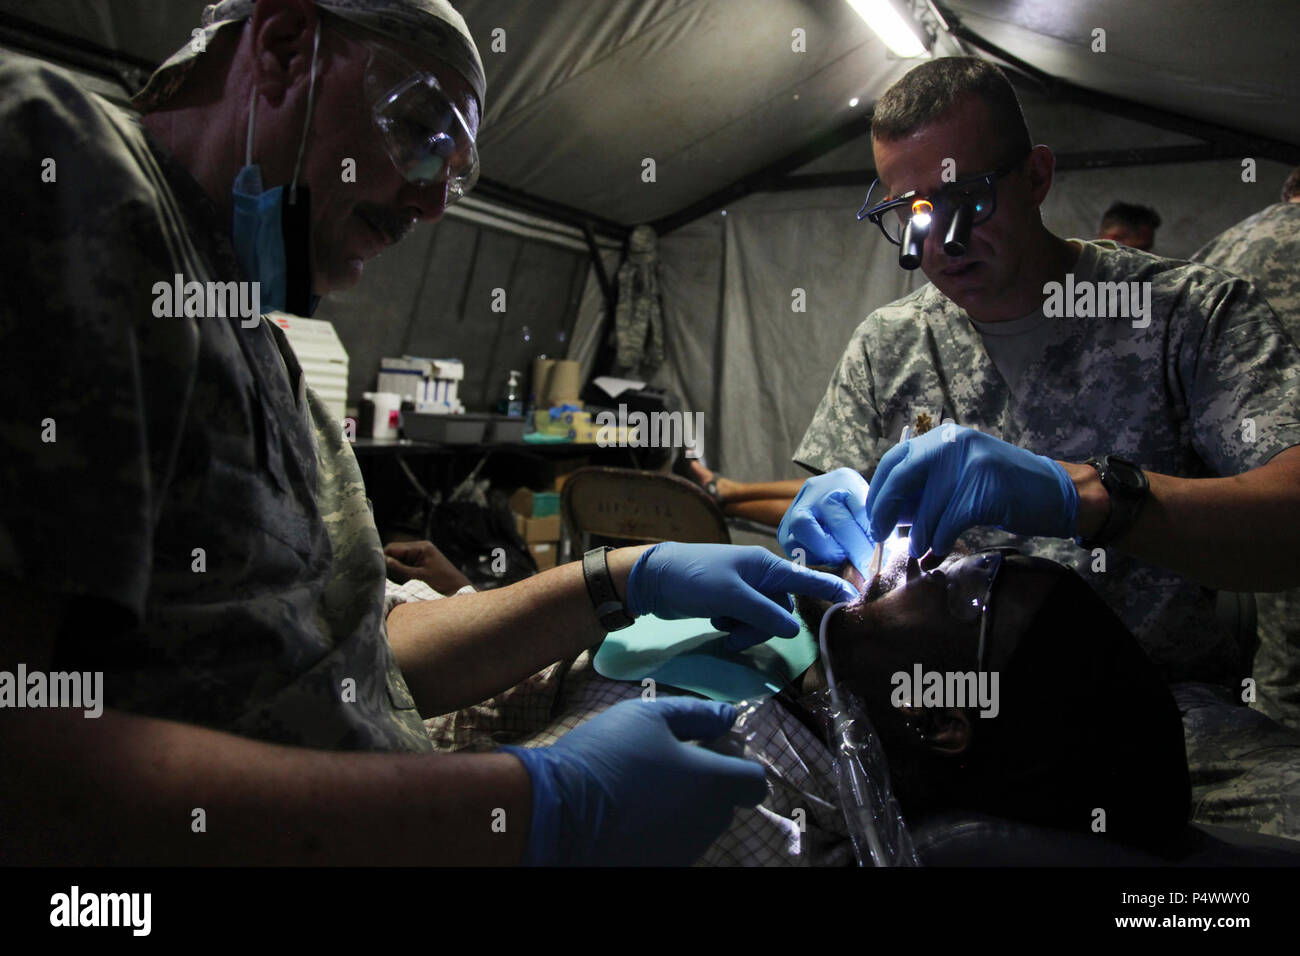 U.S. Army dental staff, with the Wyoming National Guard Medical Detachment, remove the tooth of a Belizean boy during a medical readiness event held in San Ignacio, Belize, May 09, 2017. This is the second of three medical events that are scheduled to take place during Beyond the Horizon 2017. BTH 2017 is a U.S. Southern Command-sponsored, Army South-led exercise designed to provide humanitarian and engineering services to communities in need, demonstrating U.S. support for Belize. Stock Photo